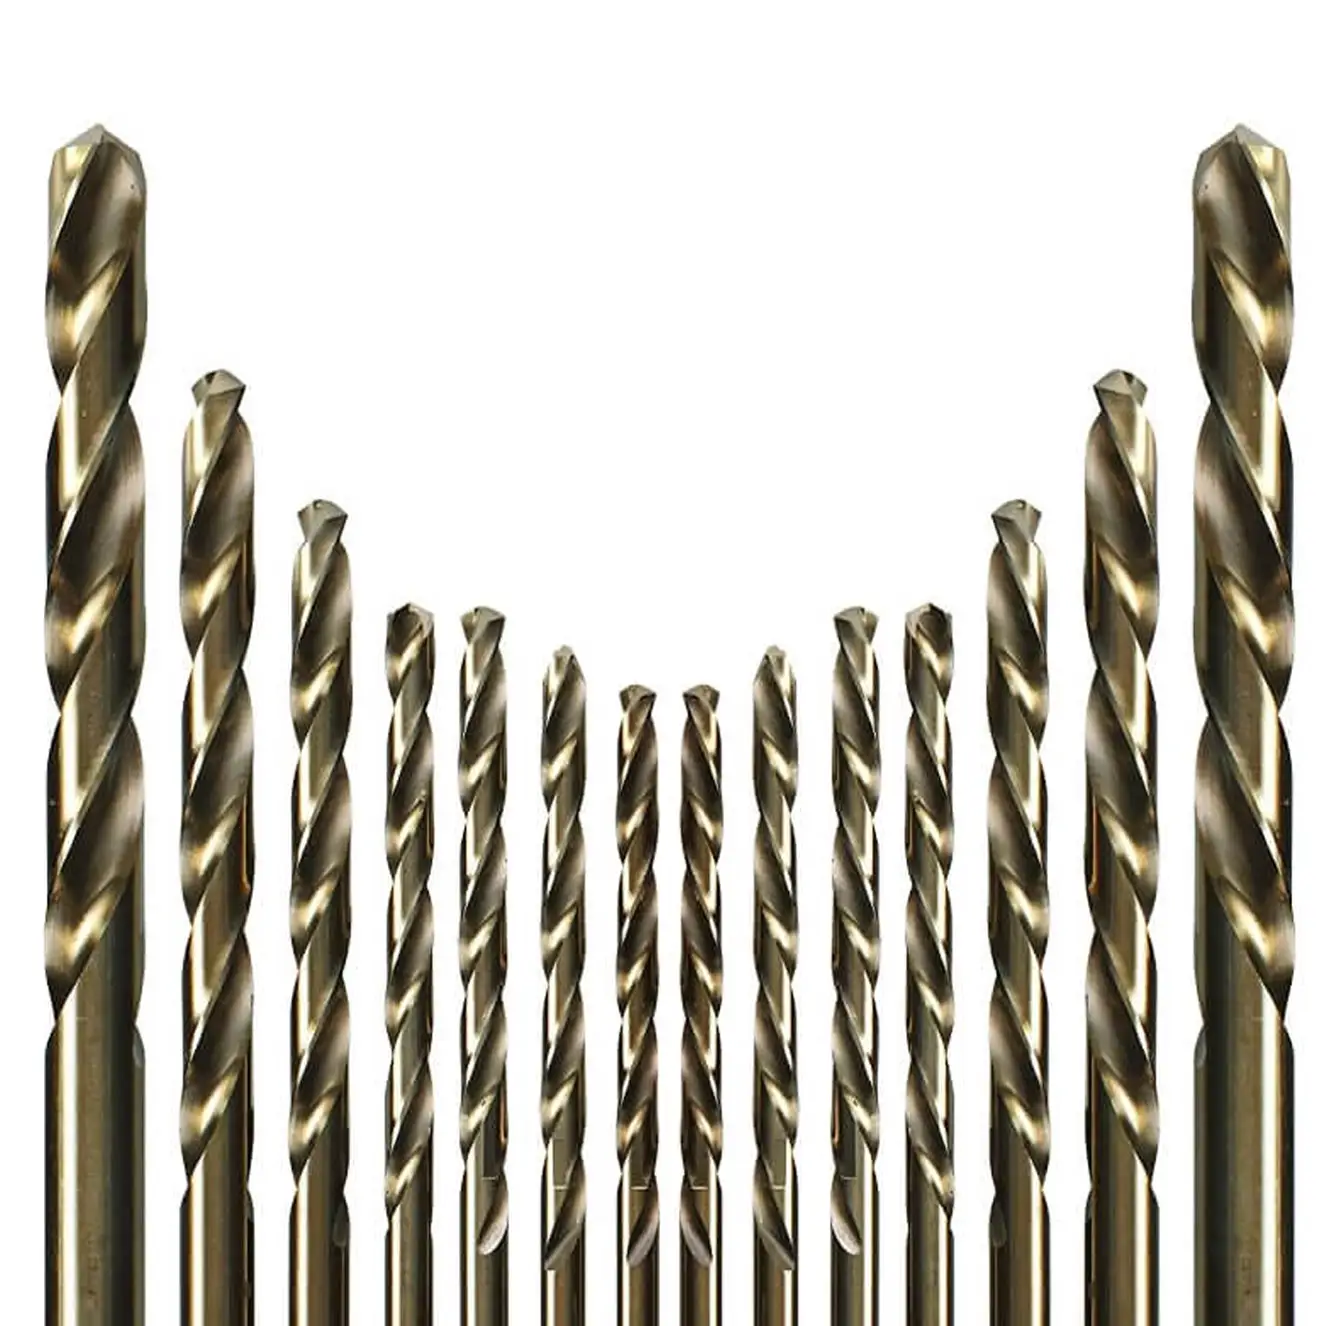 BKEA pdc cutter drill bit Tungsten Carbide Drill Bits for Hardened Steel